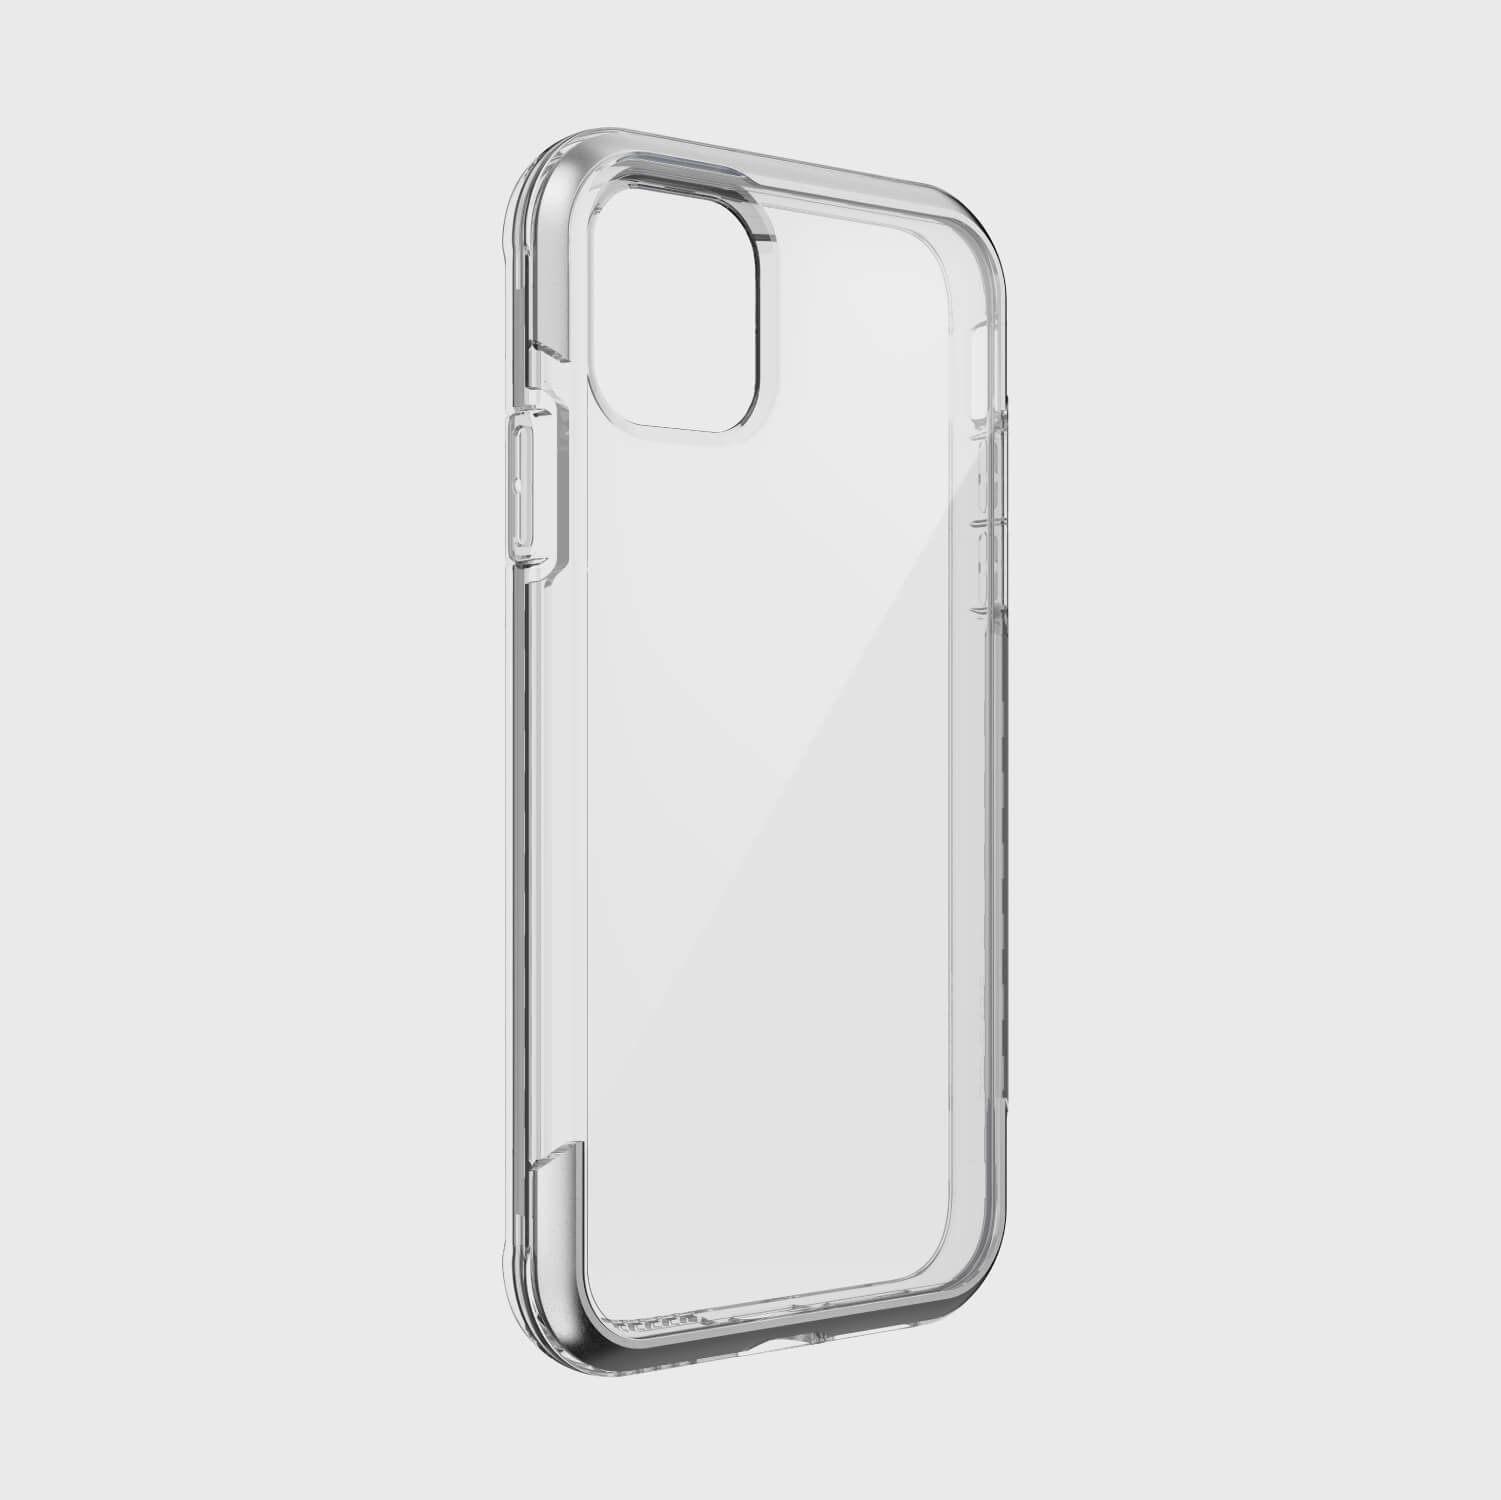 A clear iPhone 11 case - AIR by Raptic on a white background with wireless charging capability.